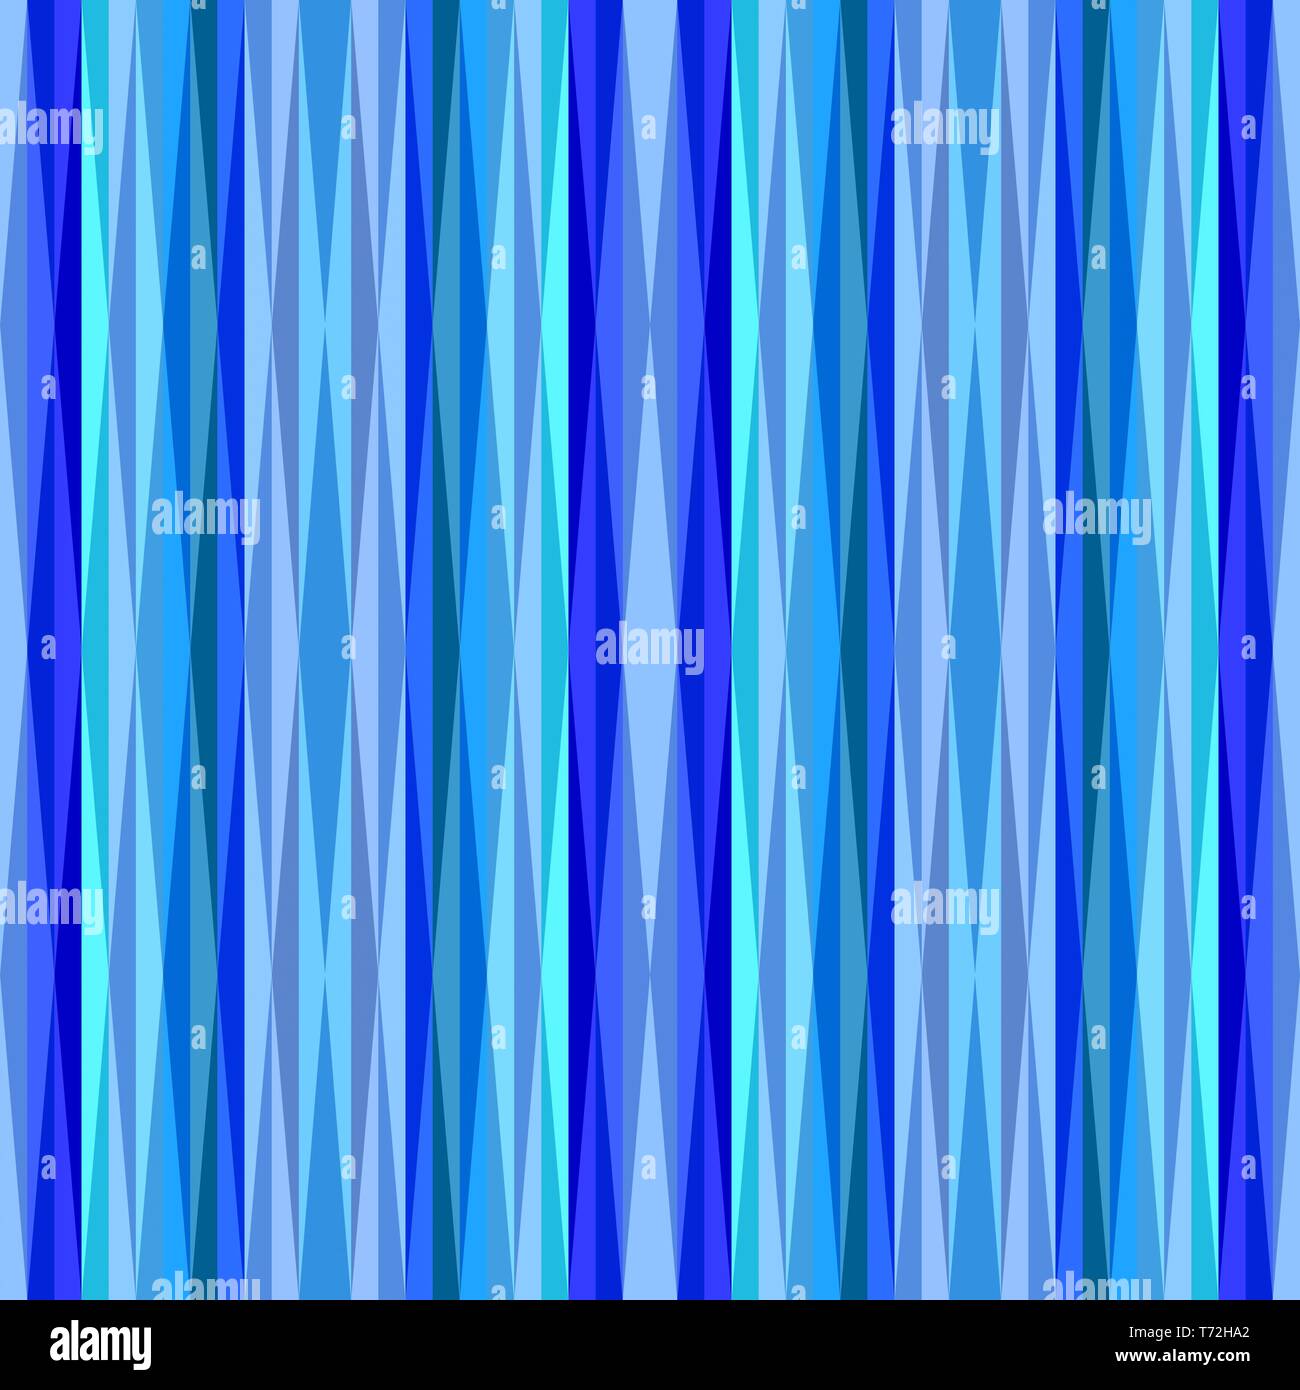 Modern Striped Background With Royal Blue Medium And Light